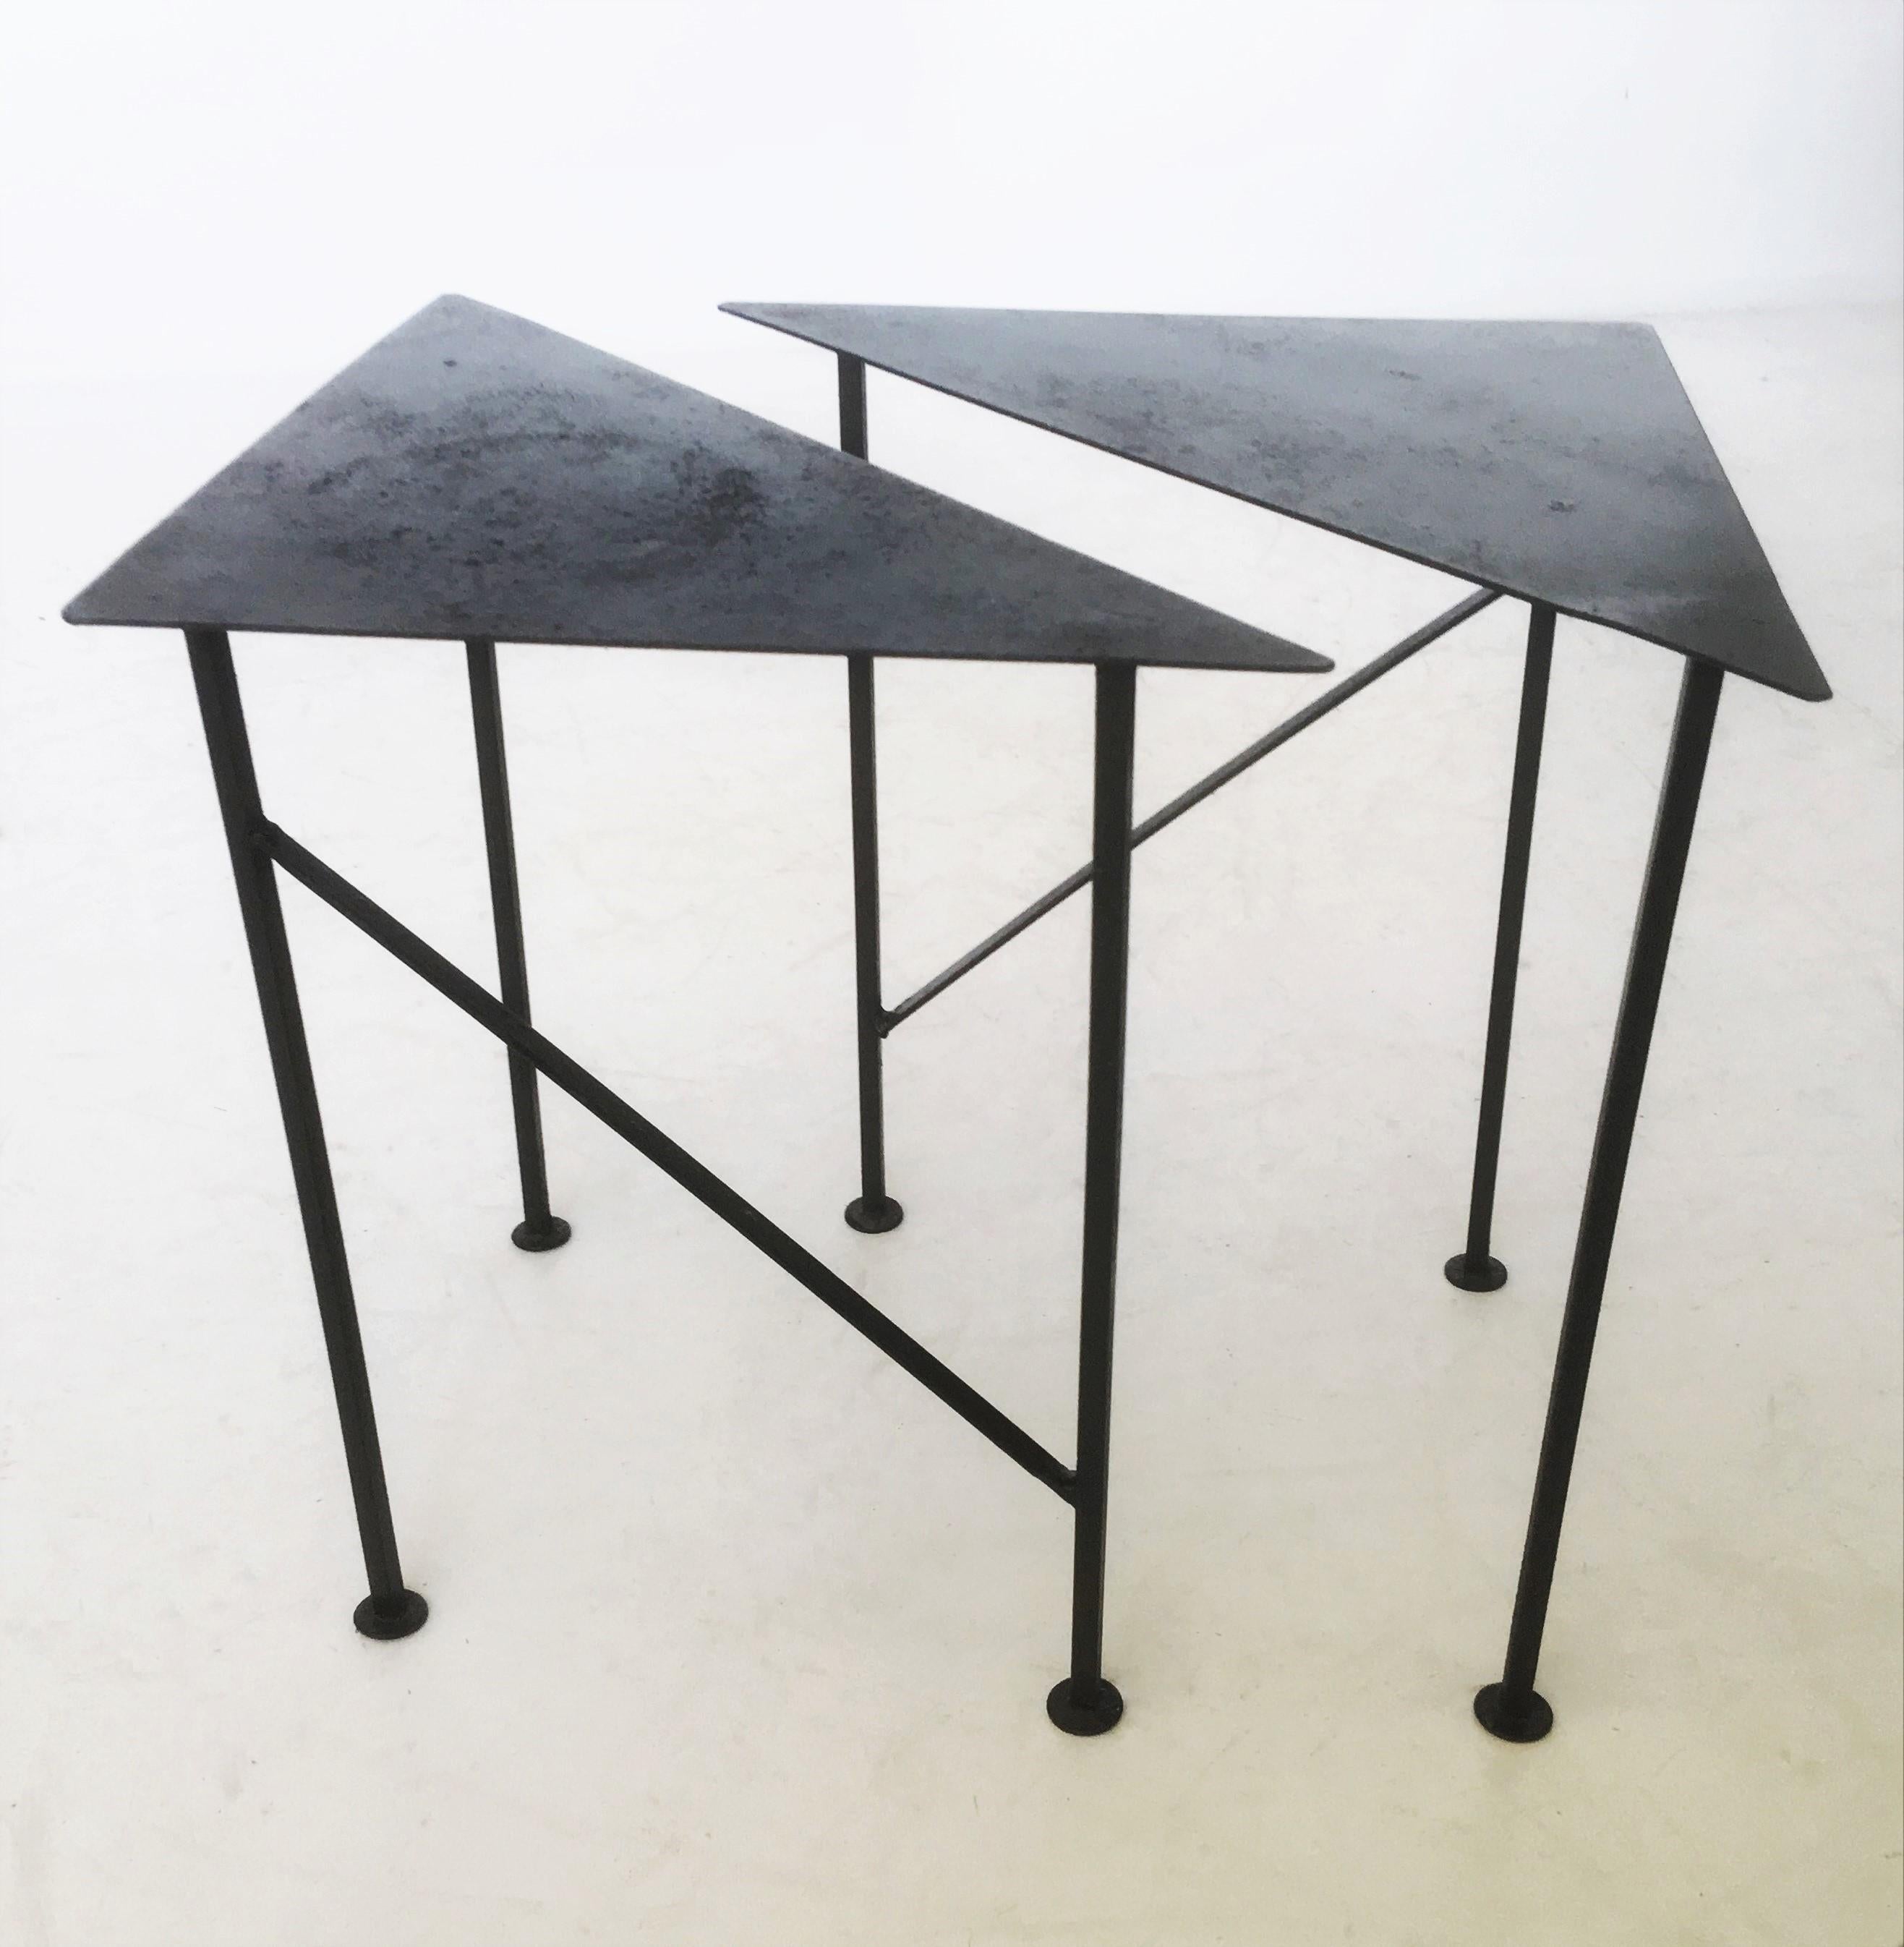 20th Century Unique Triangular Handcrafted Blackened Iron Drink Tables, Set of Two